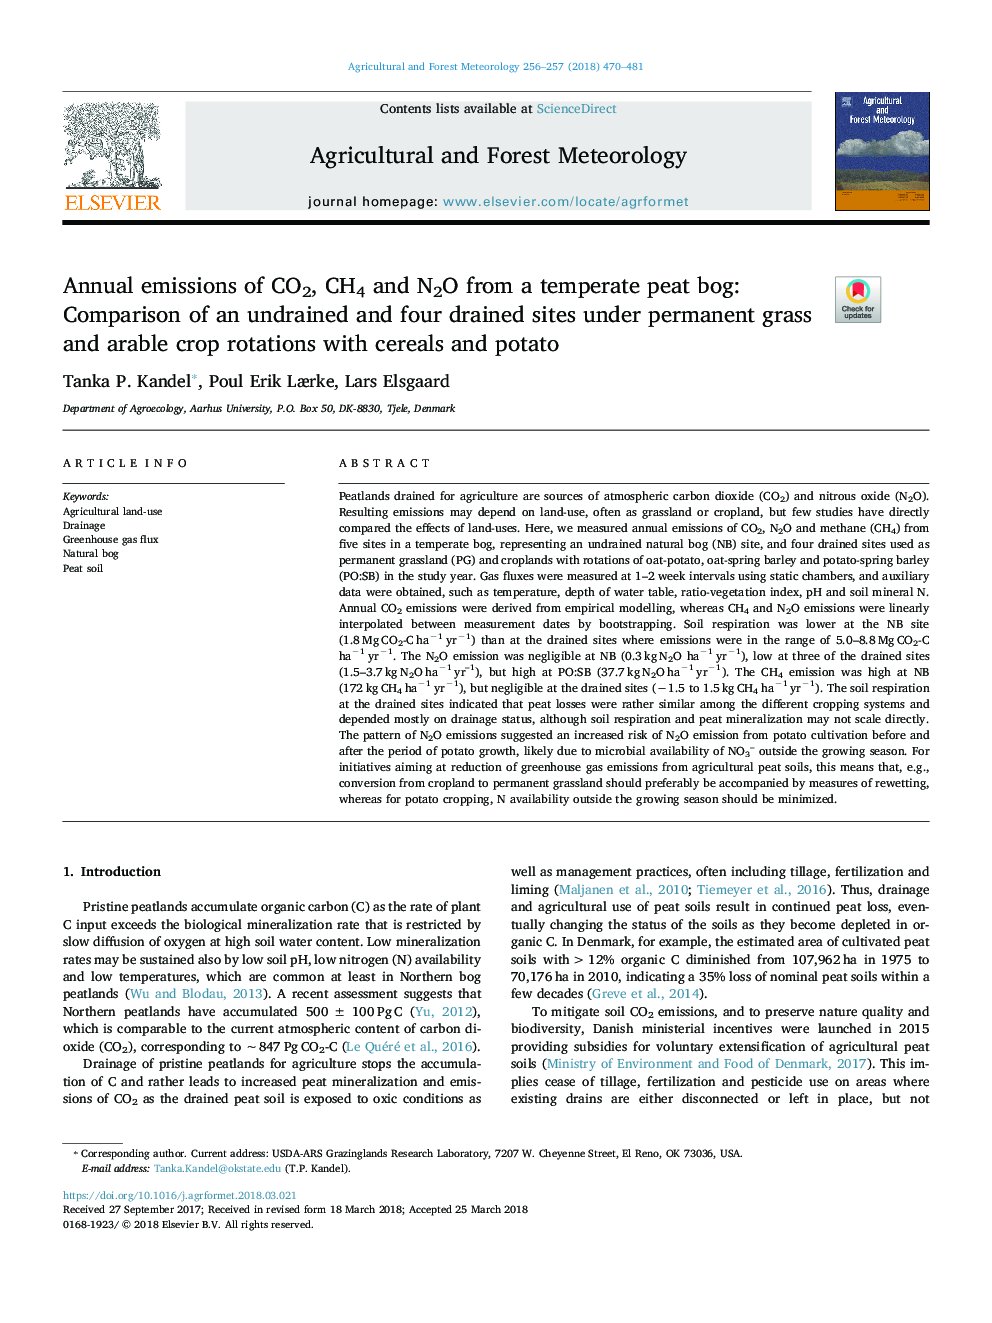 Annual emissions of CO2, CH4 and N2O from a temperate peat bog: Comparison of an undrained and four drained sites under permanent grass and arable crop rotations with cereals and potato